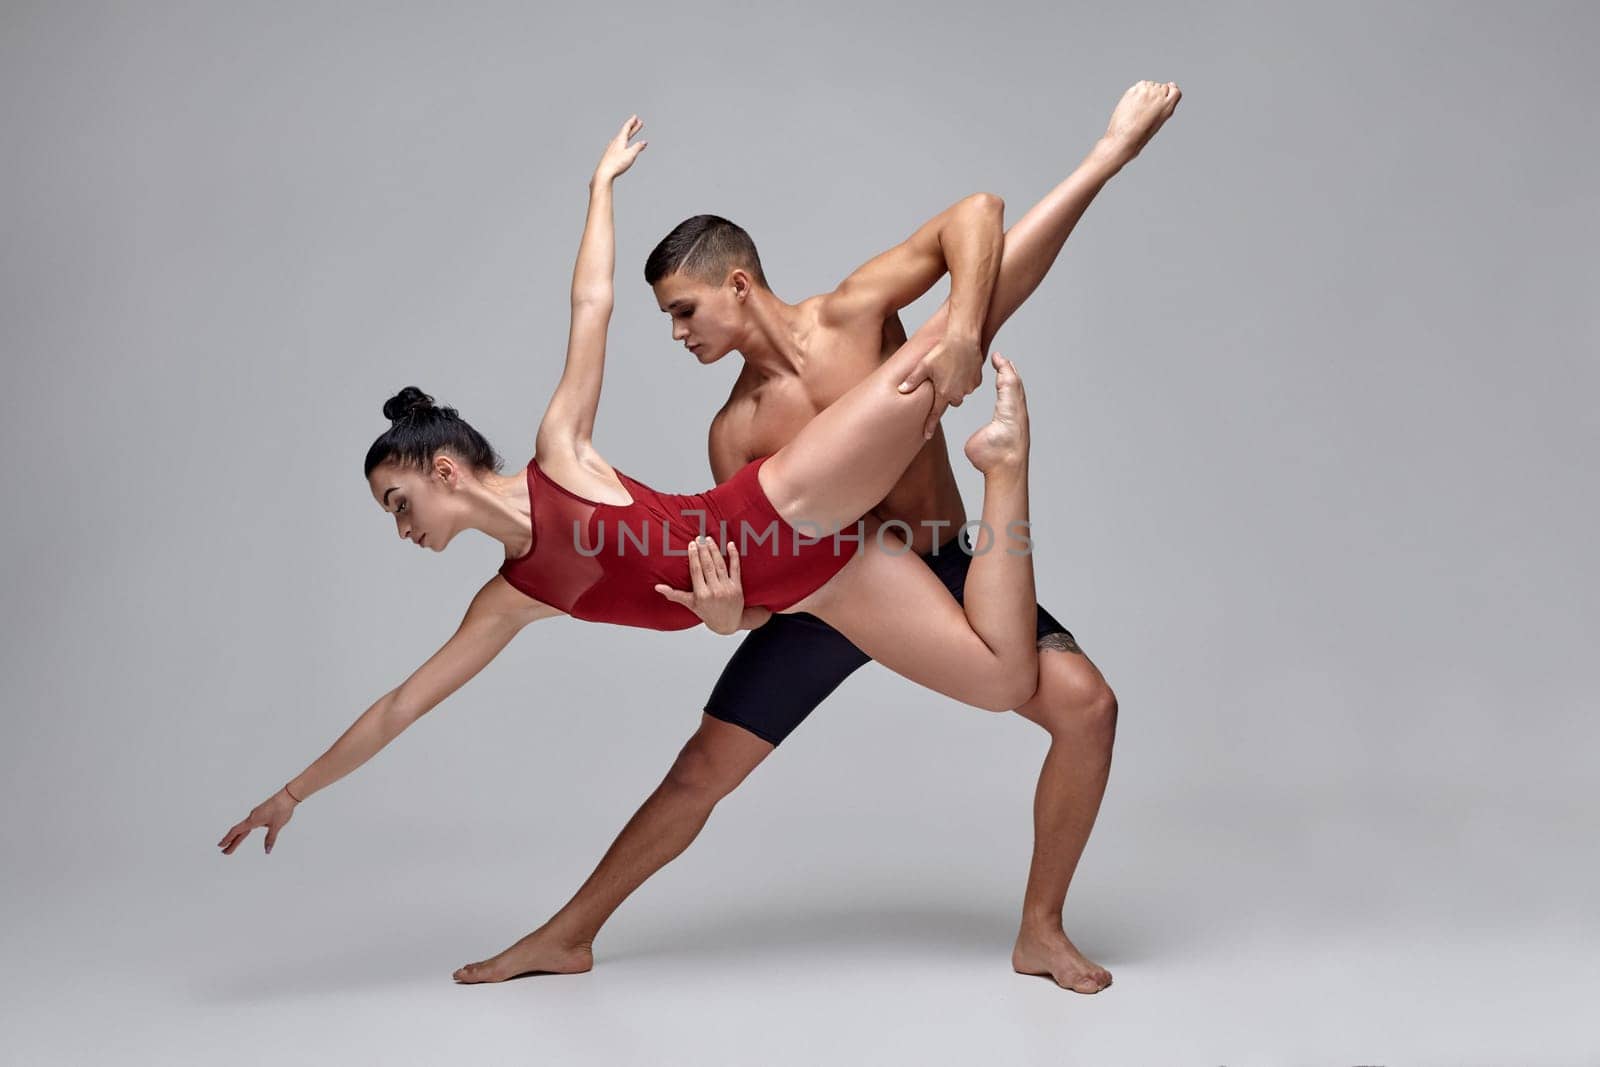 The couple of a strong ballet dancers are posing over a gray studio background. Man in black shorts and girl in a red beautiful swimwear are dancing together. Ballet and contemporary choreography concept. Art photo.